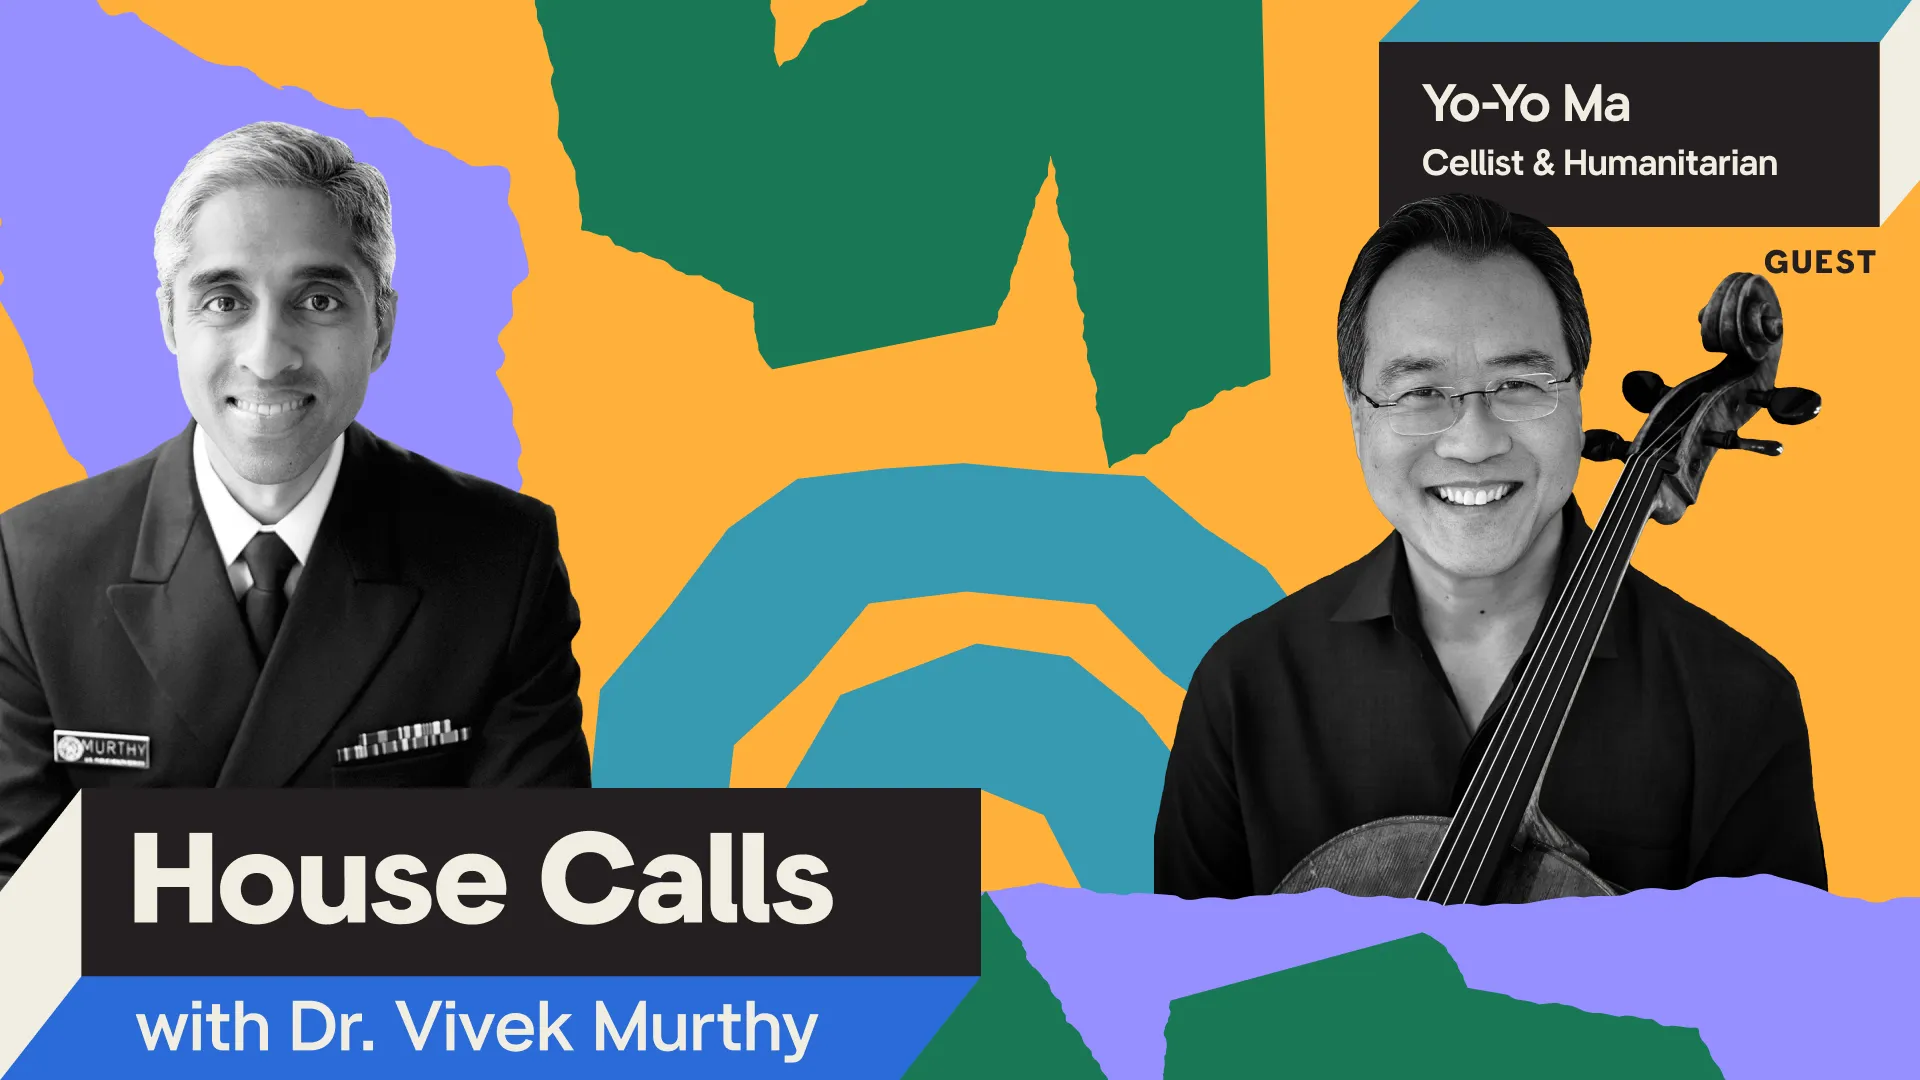 Black and white portraits of Surgeon General Vivek Murthy and Yo-Yo Ma with a colorful background.